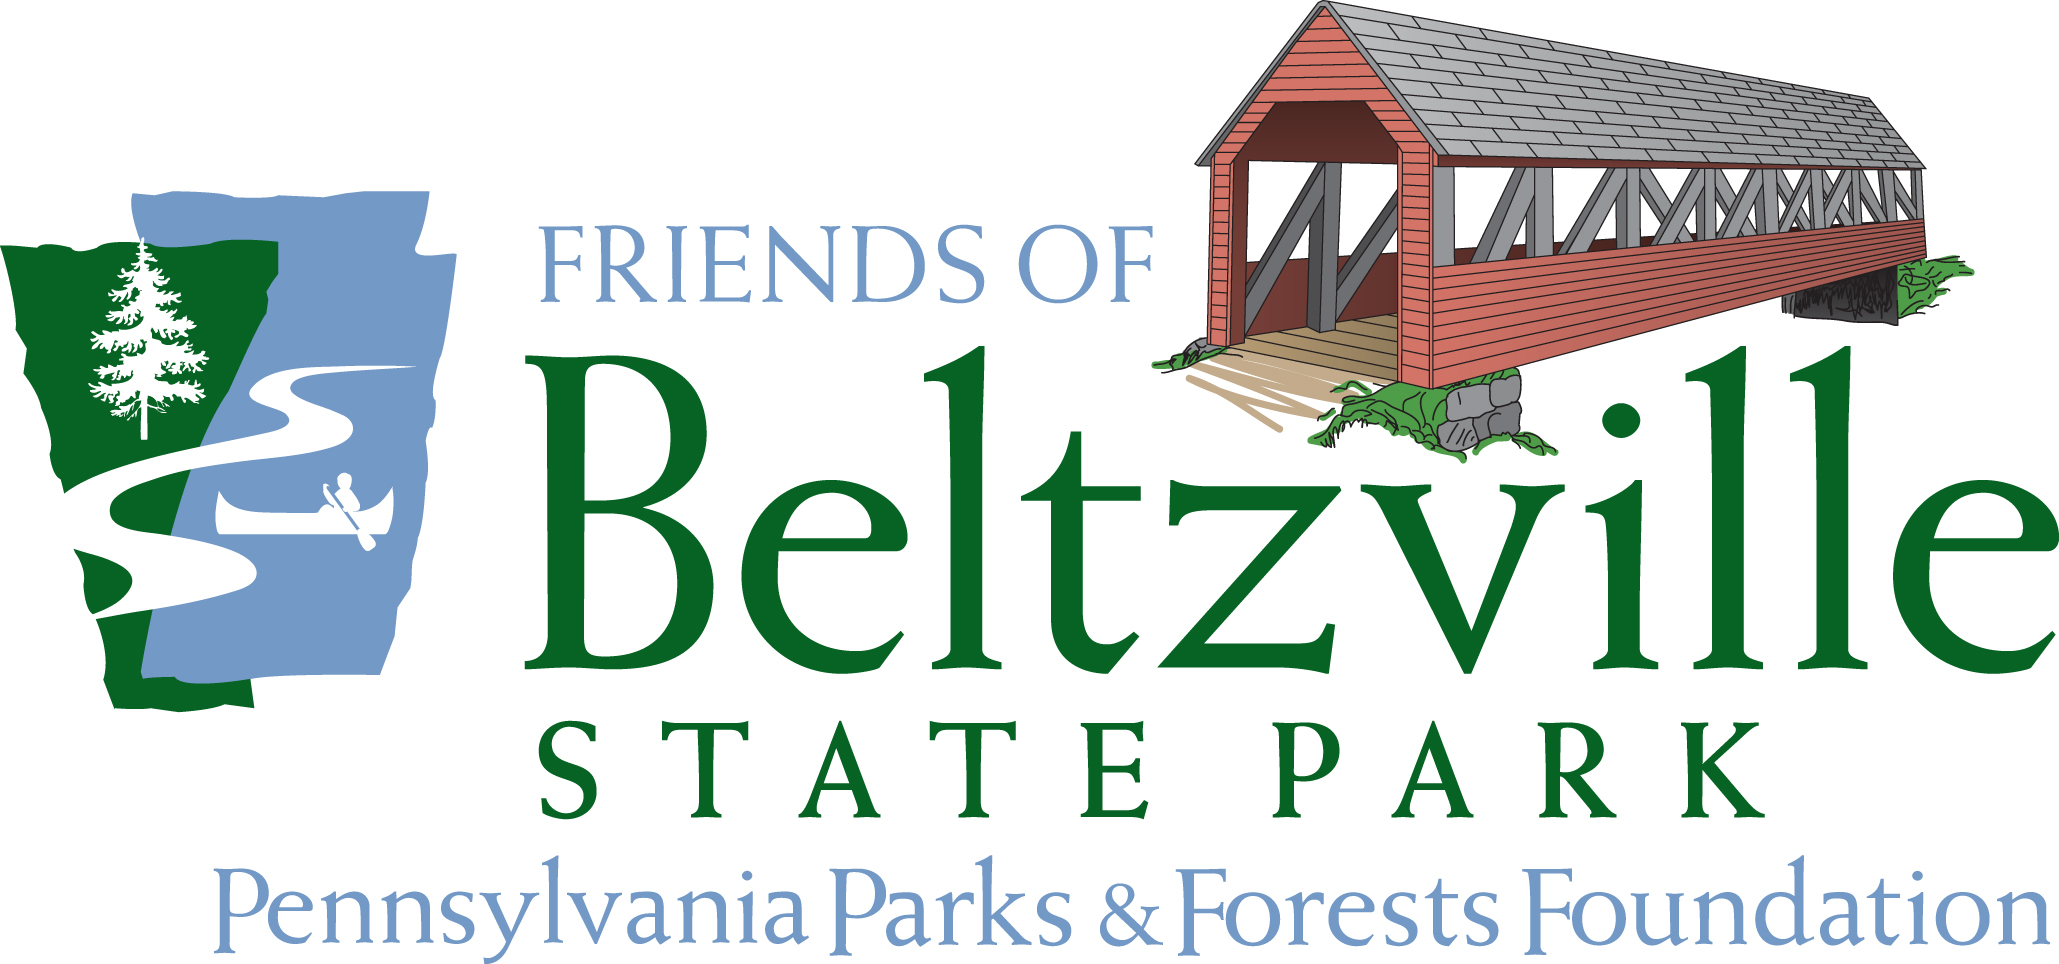 EARTH DAY HIKE WITH THE FRIENDS OF BELTZVILLE